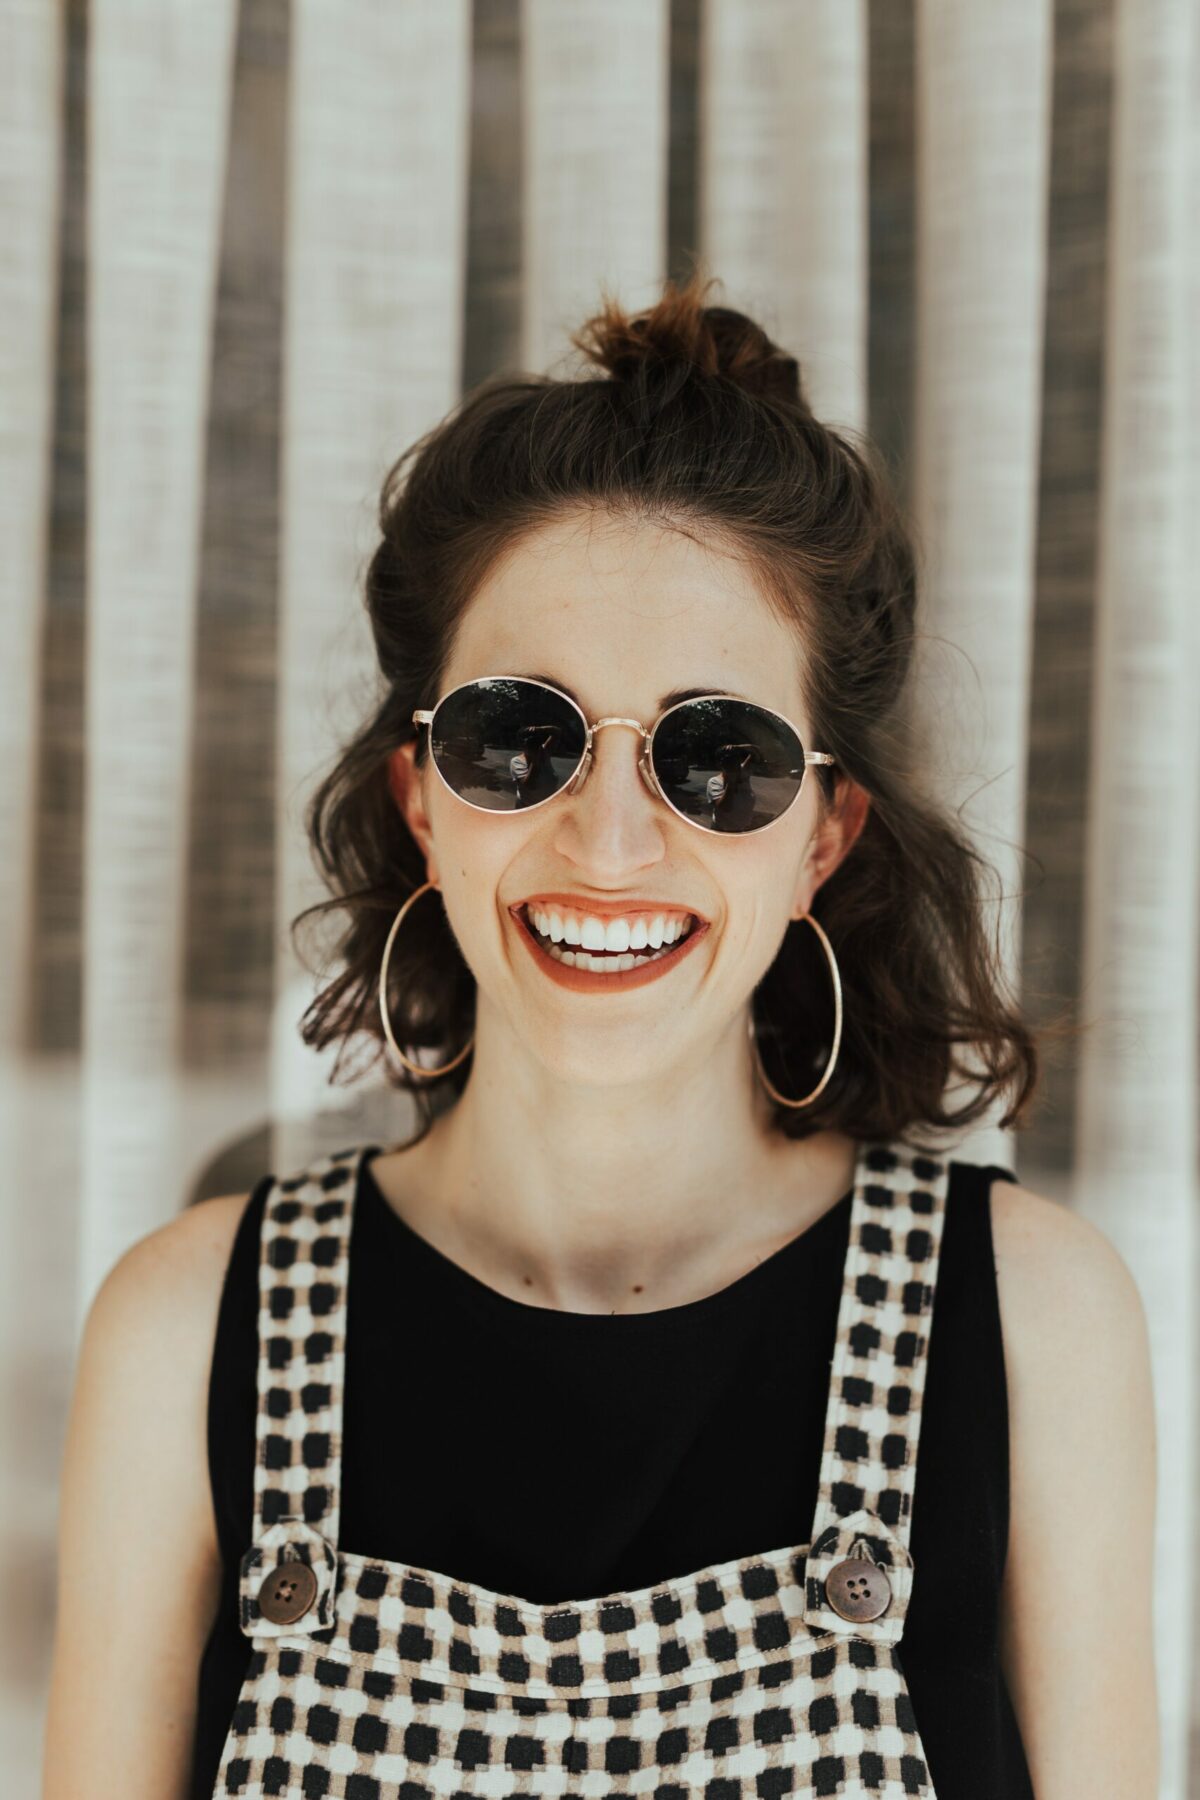 Woman with sunglasses smiling.